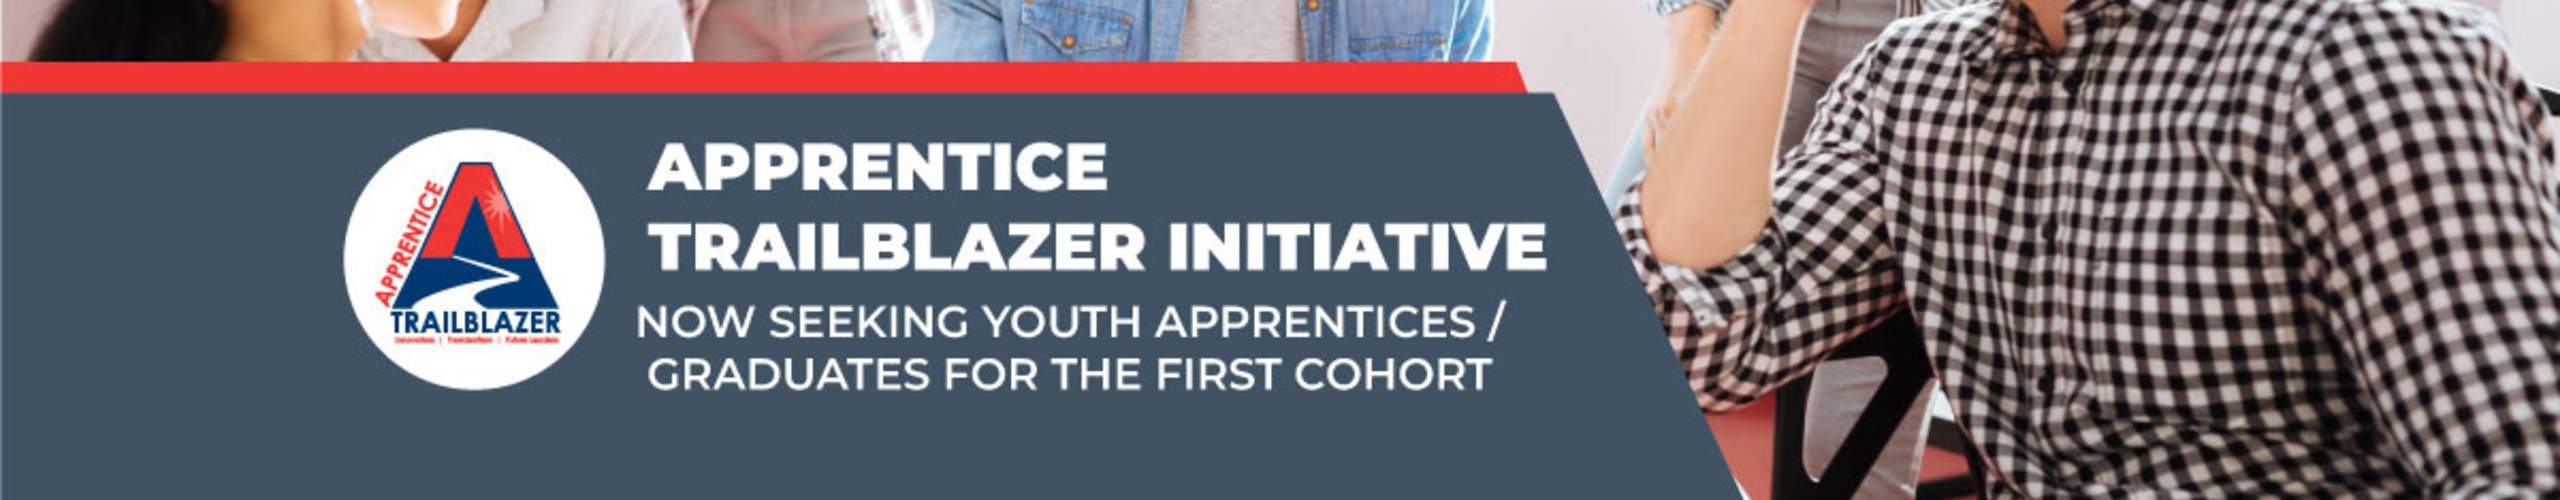 Apprentice Trailblazer Initiative: Now Seeking Youth Apprentices/Graduates for the First Cohort